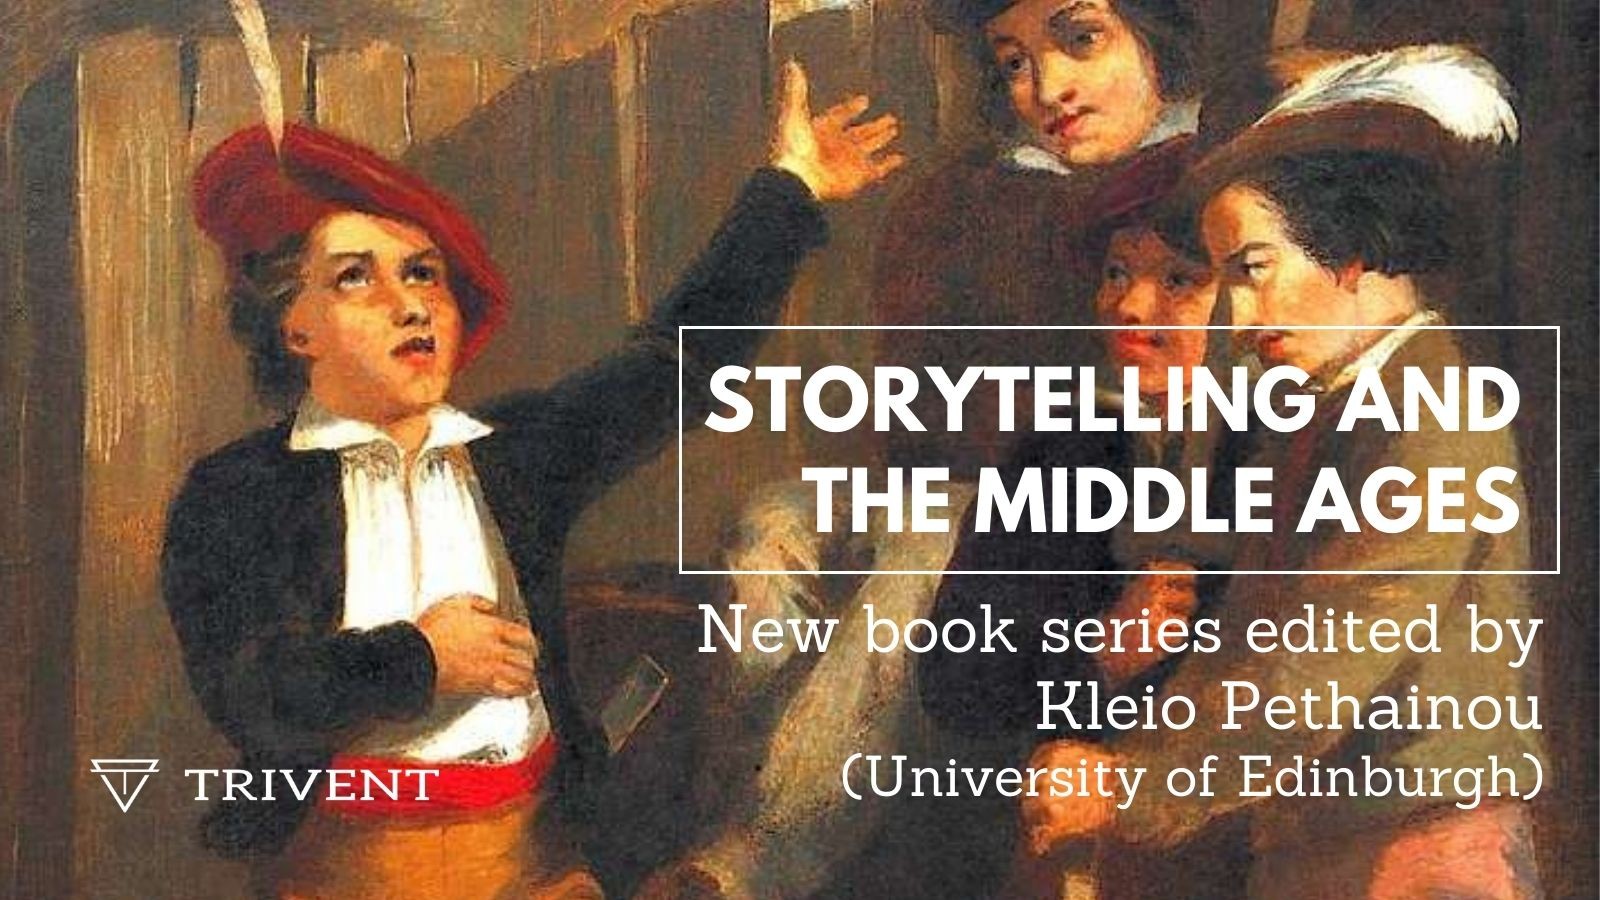 Storytelling and the Middle Ages